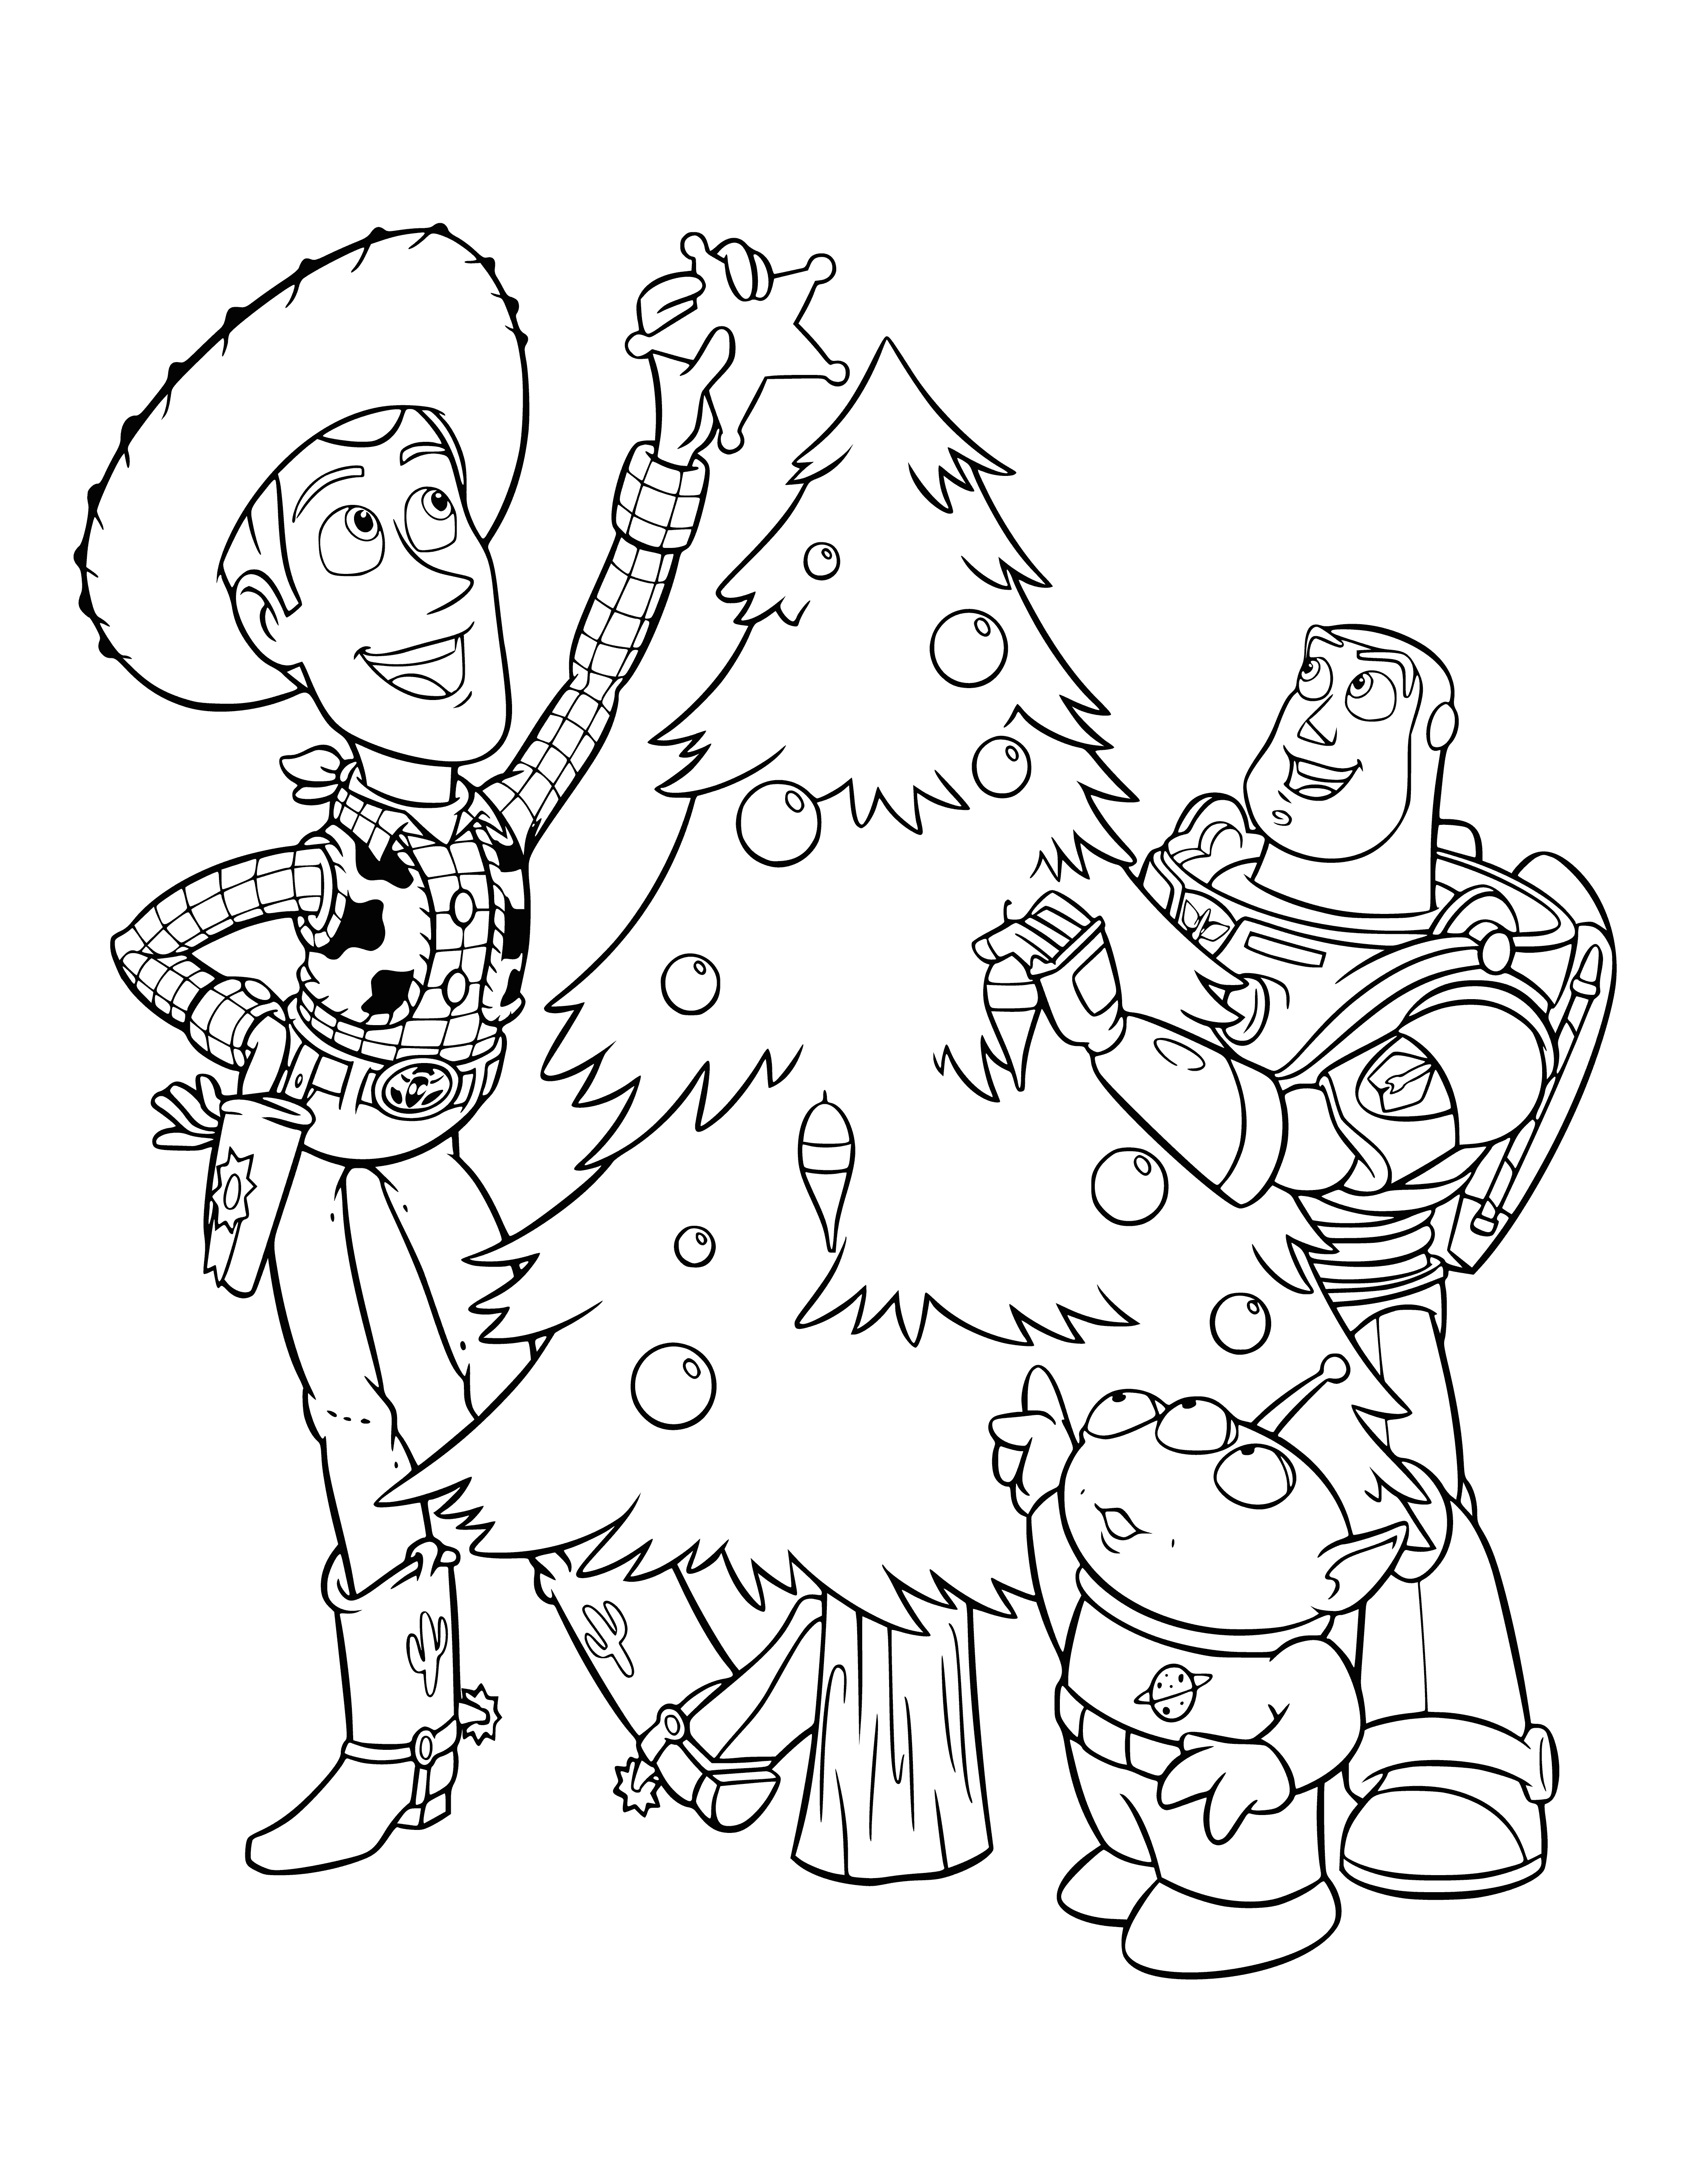 coloring page: Disney characters decorate Christmas tree, enjoy each other's company & ring in the new year in a festive scene.